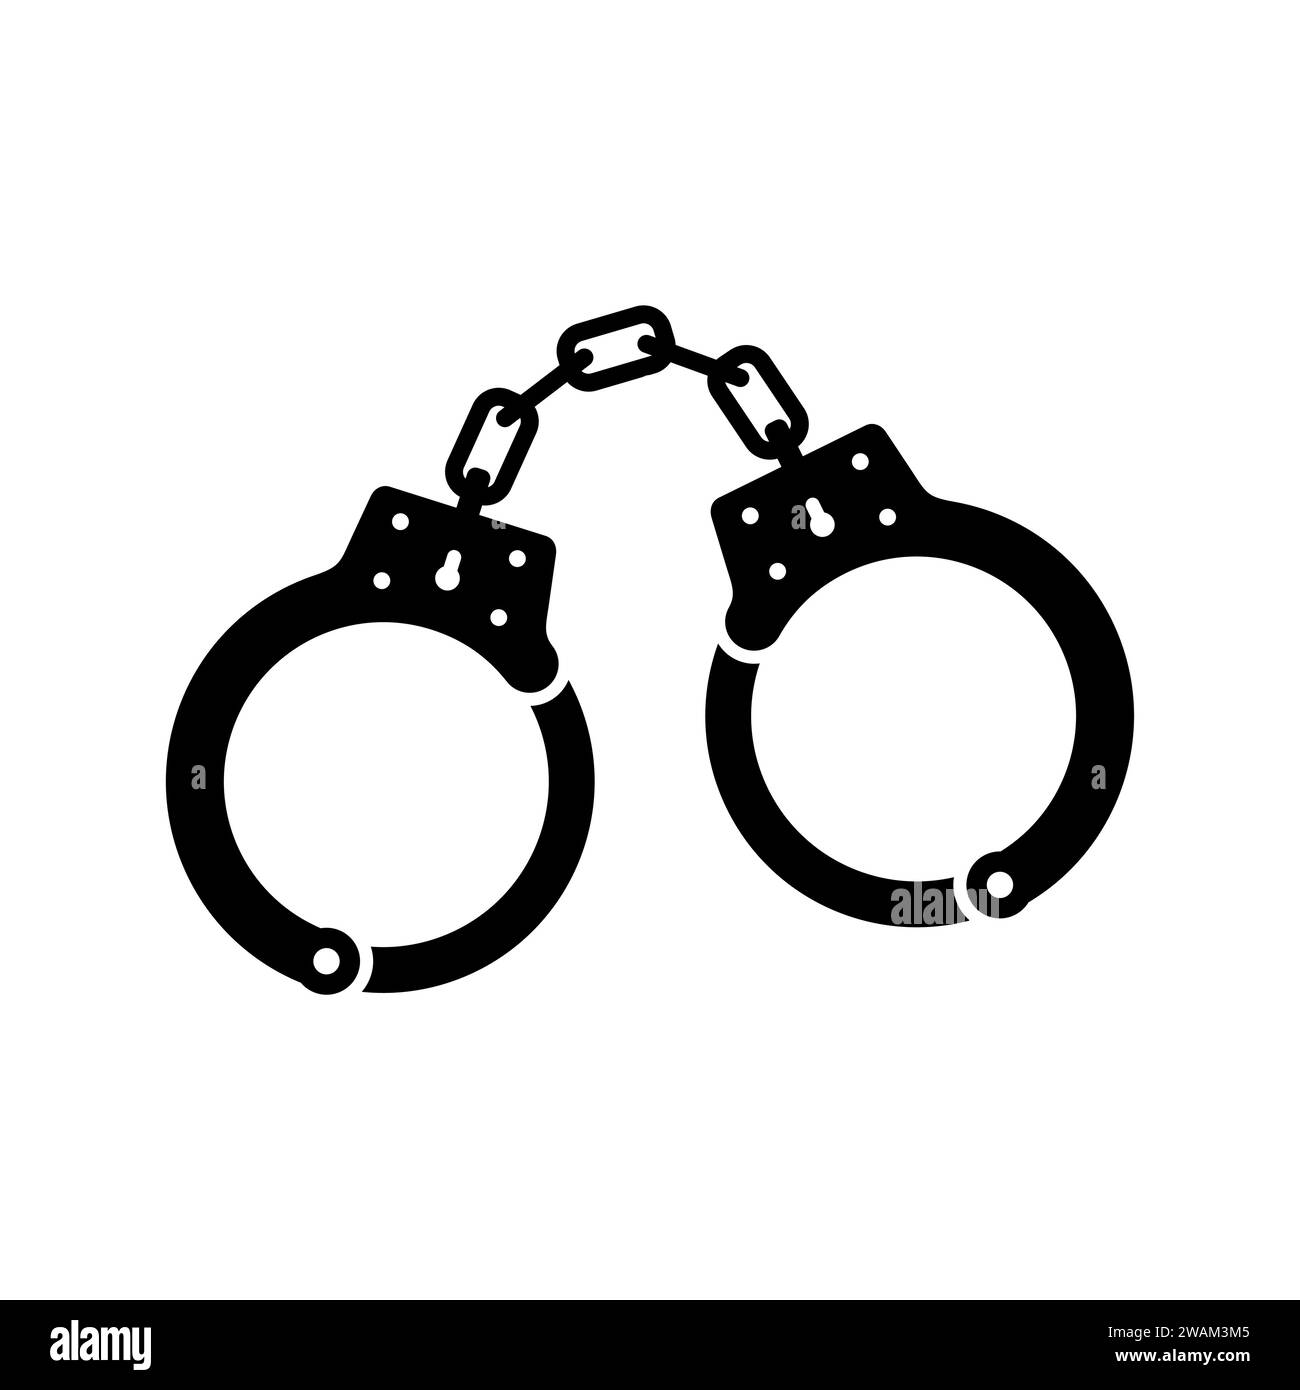 Handcuffs icon for detaining criminals isolated on white background. Outfit of a policeman. Element of police and prison icon of arrest of offender. R Stock Vector